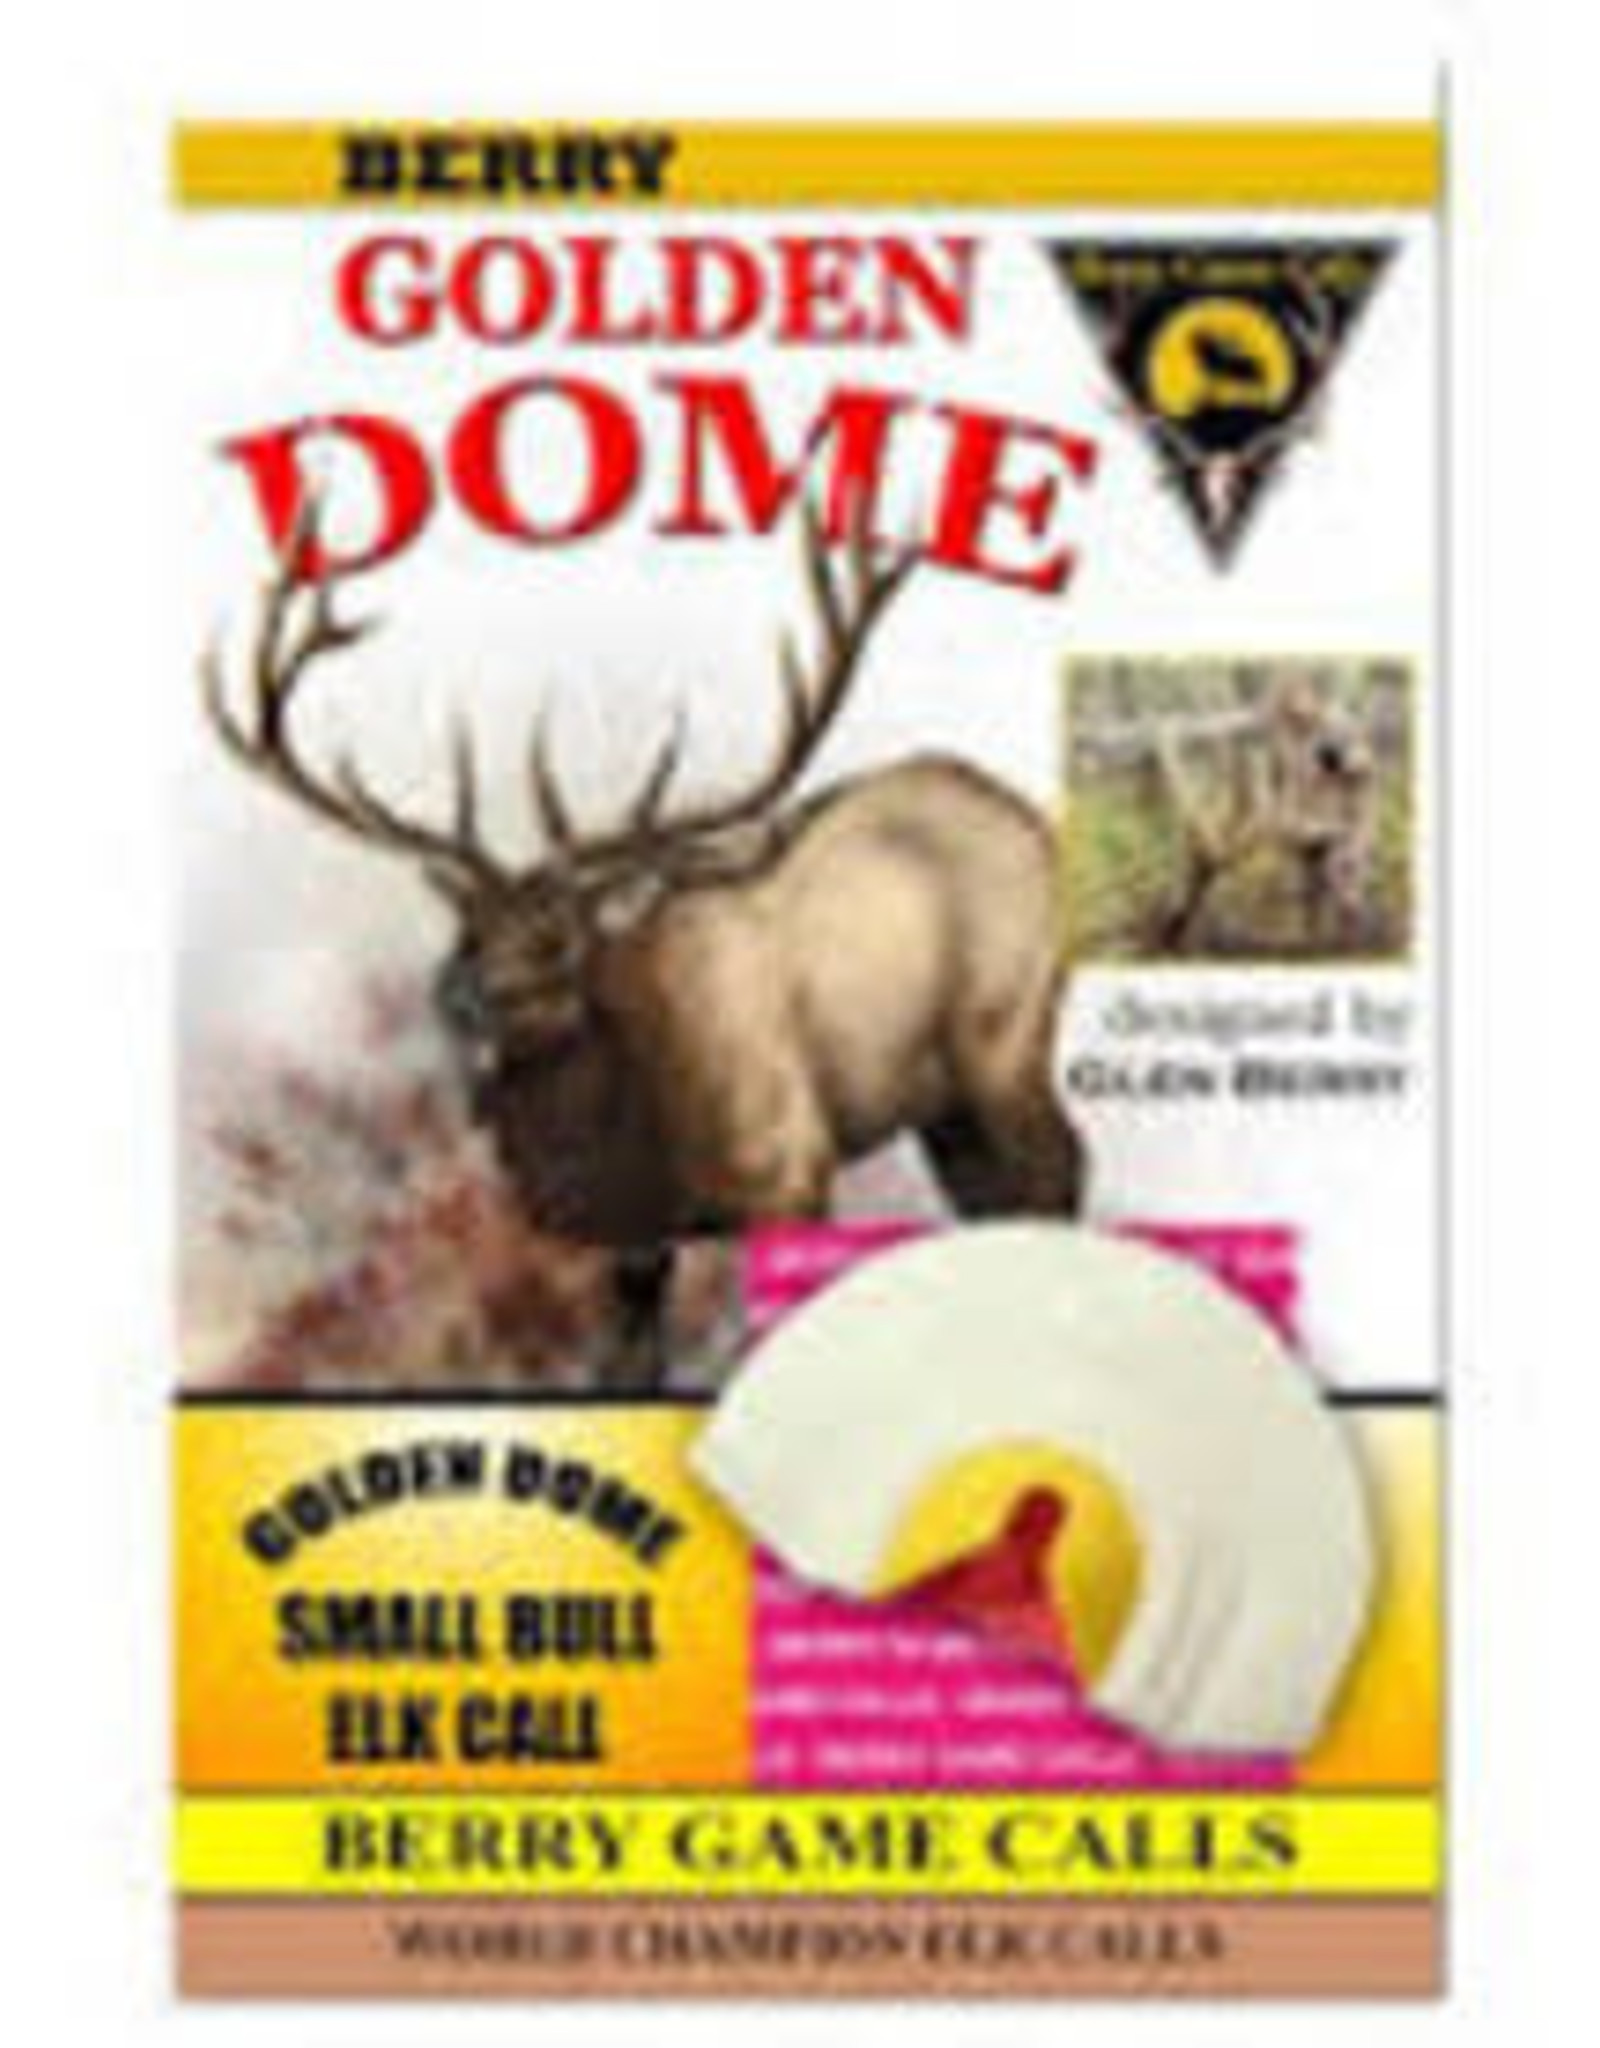 Berry Game Calls Golden Dome Small Bull Elk Call